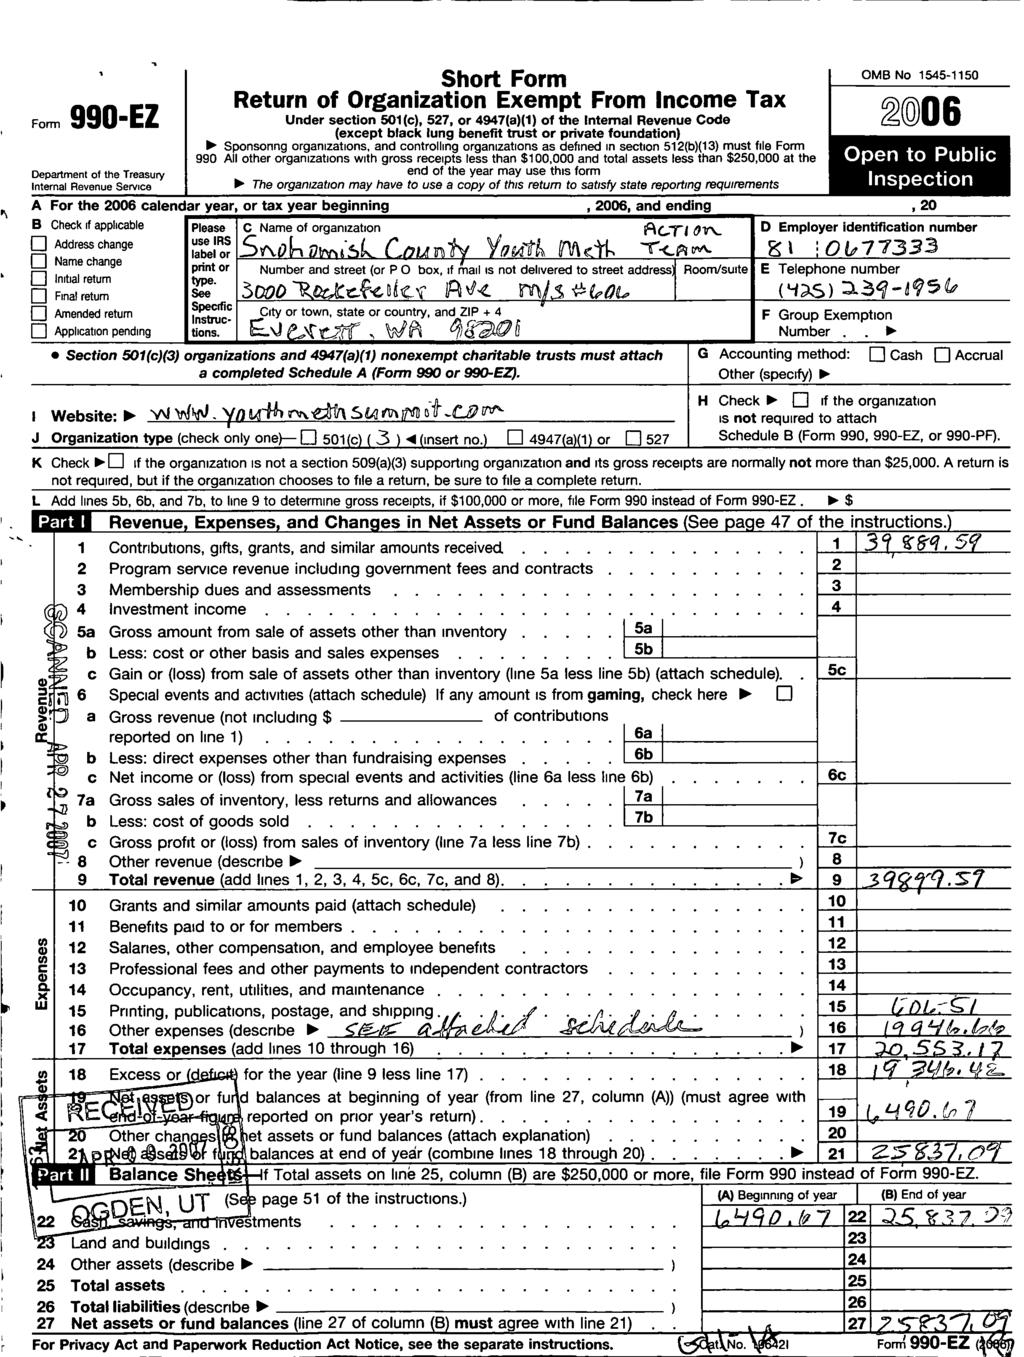 Form 990 -EZ Short Form Return of Organization Exempt From Income Tax Under section 501 (c), 527, or 4947(a)(1) of the Internal Revenue Code (except black lung benefit trust or private foundation)